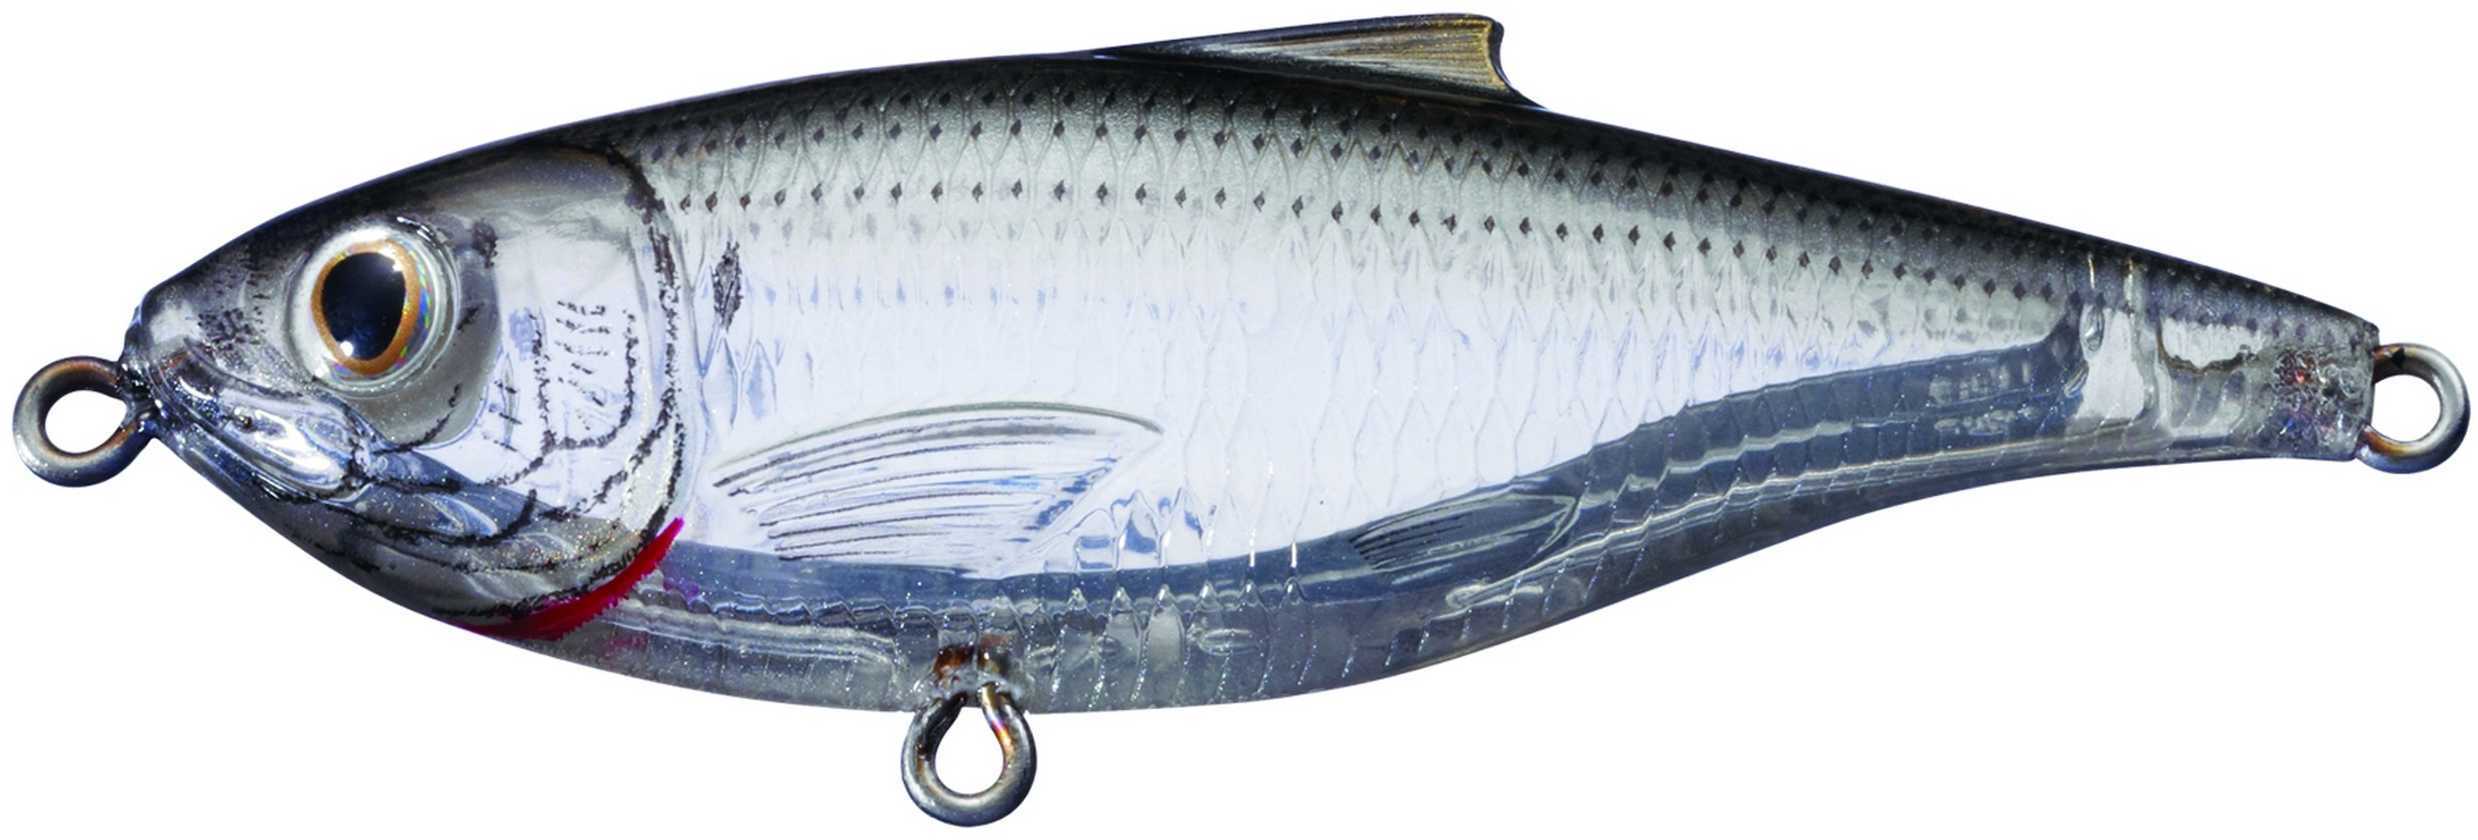 LIVETARGET Lures / Koppers Fishing and Tackle Corp Scaled Sardine Twitchbait Ghost/Natural #2 Md: SST90S948